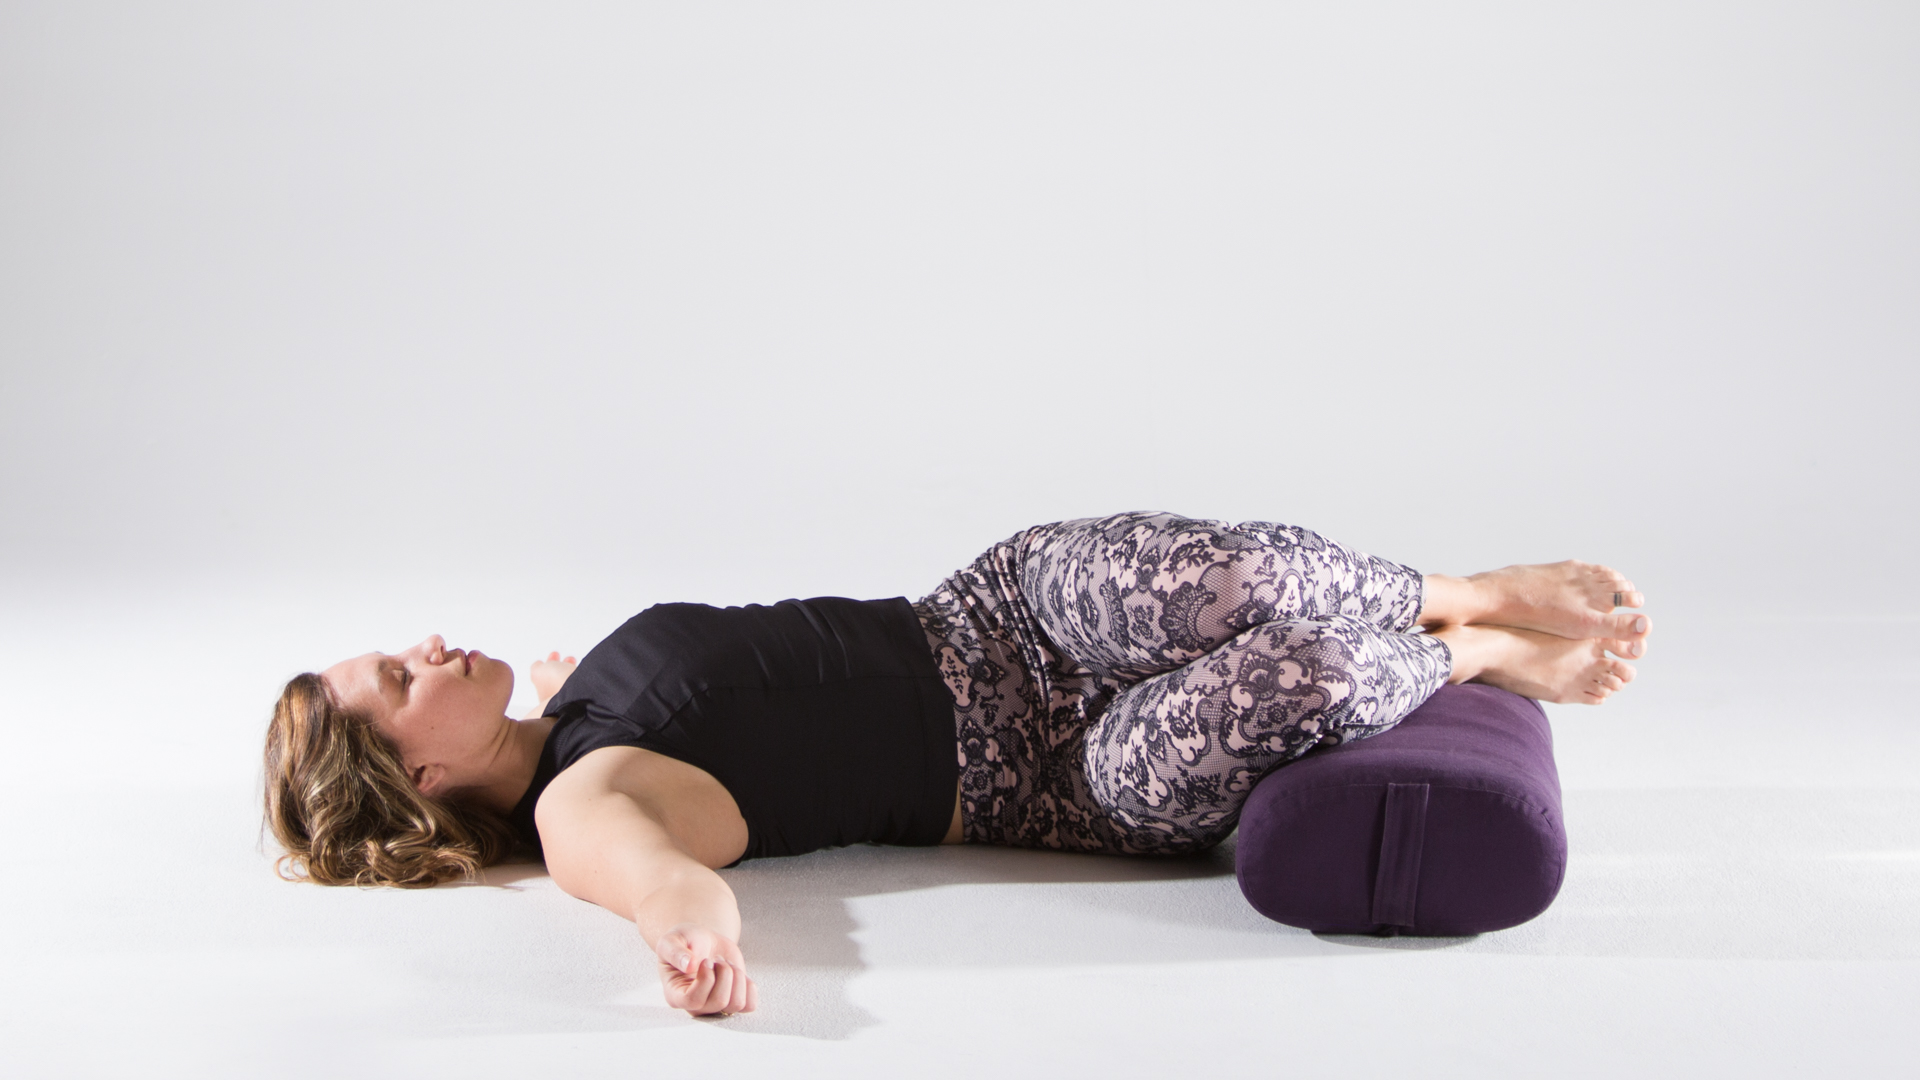 Stress-Free Restorative Yoga With Bolster for Relaxation 20 Minutes 